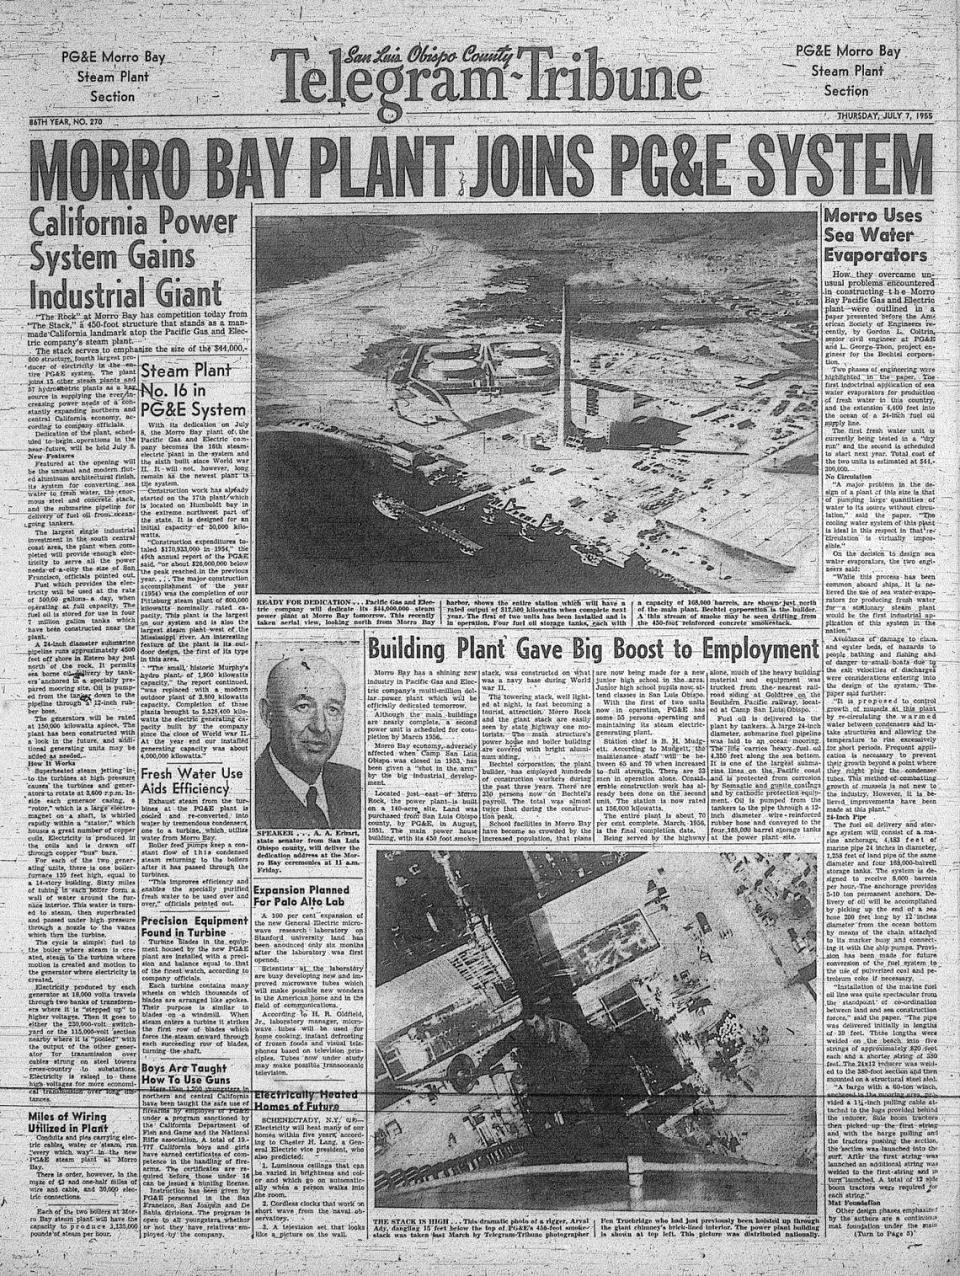 Telegram-Tribune shows one smoke stack started the Morro Bay Power plant built by Bechtel for PG&E in July 1955.